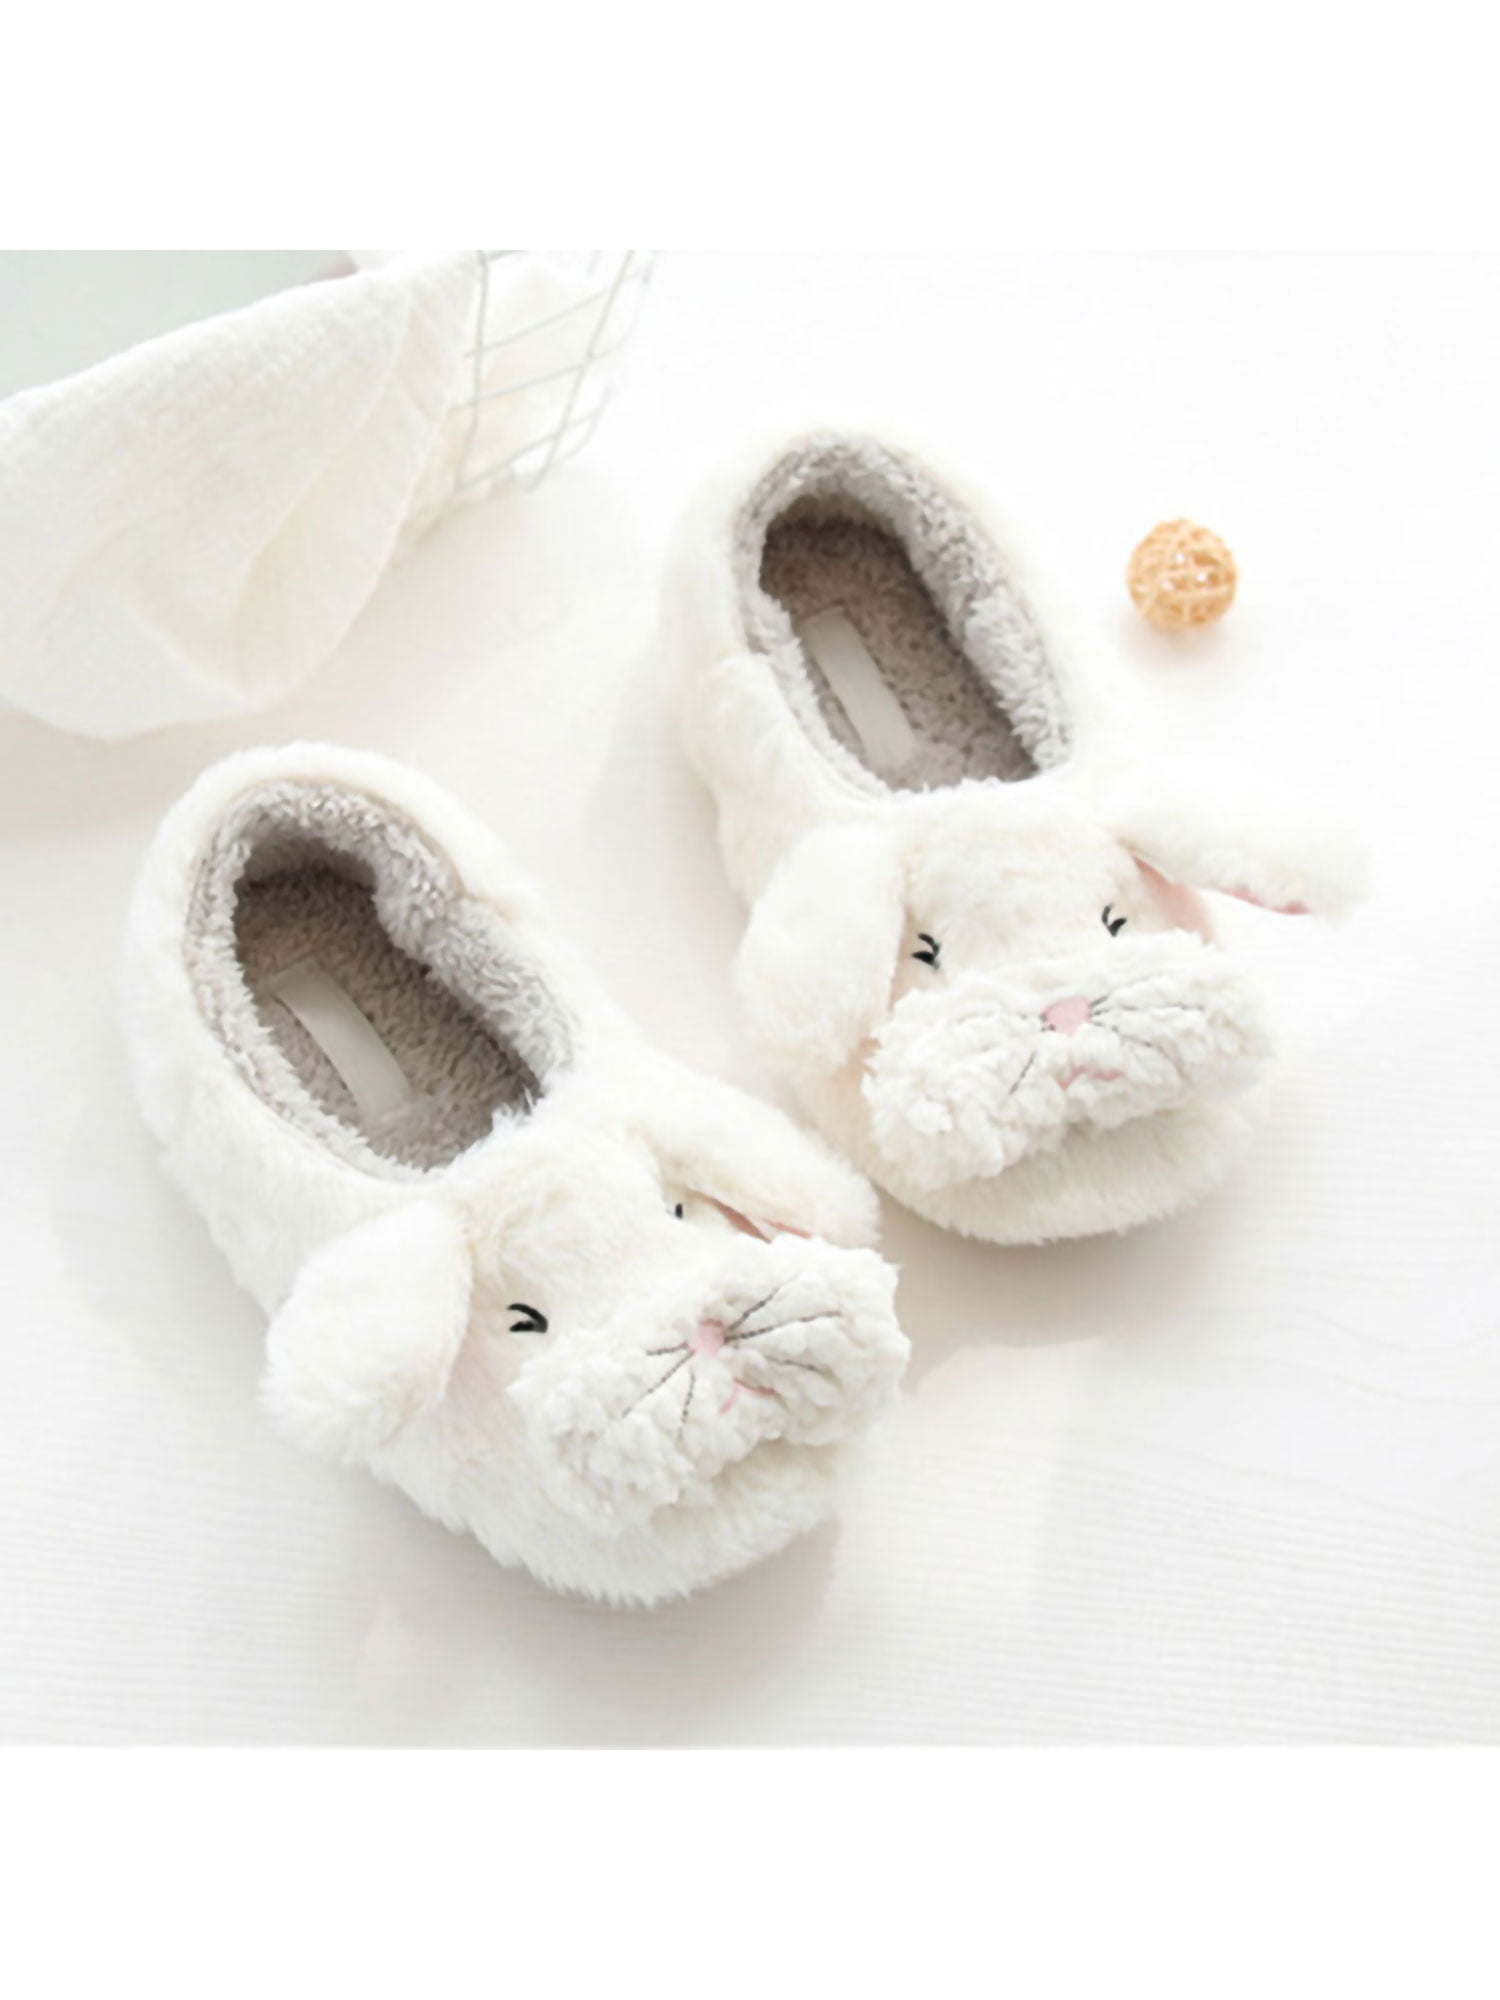 Details about   Dog Slippers Bedroom Puppy Girl Winter Plush Indoor Shoes Soft Warm Home Decor 